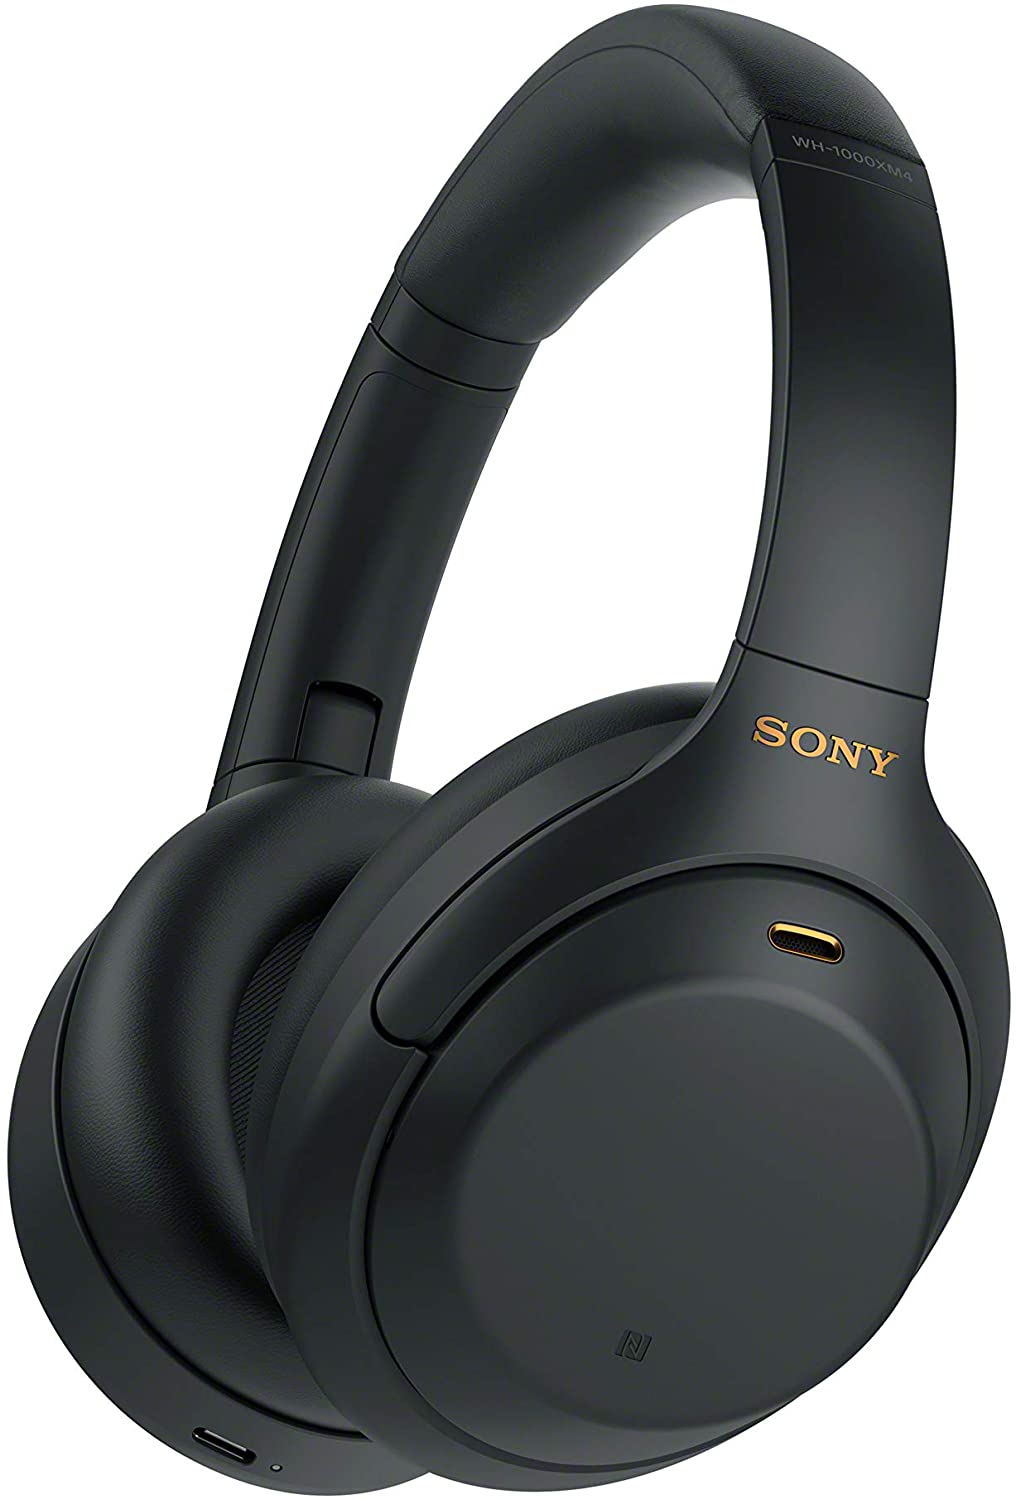 Sony WH-1000XM4 Wireless Noise-Cancelling Over-the-Ear Headphones - Black (Pre-Owned)